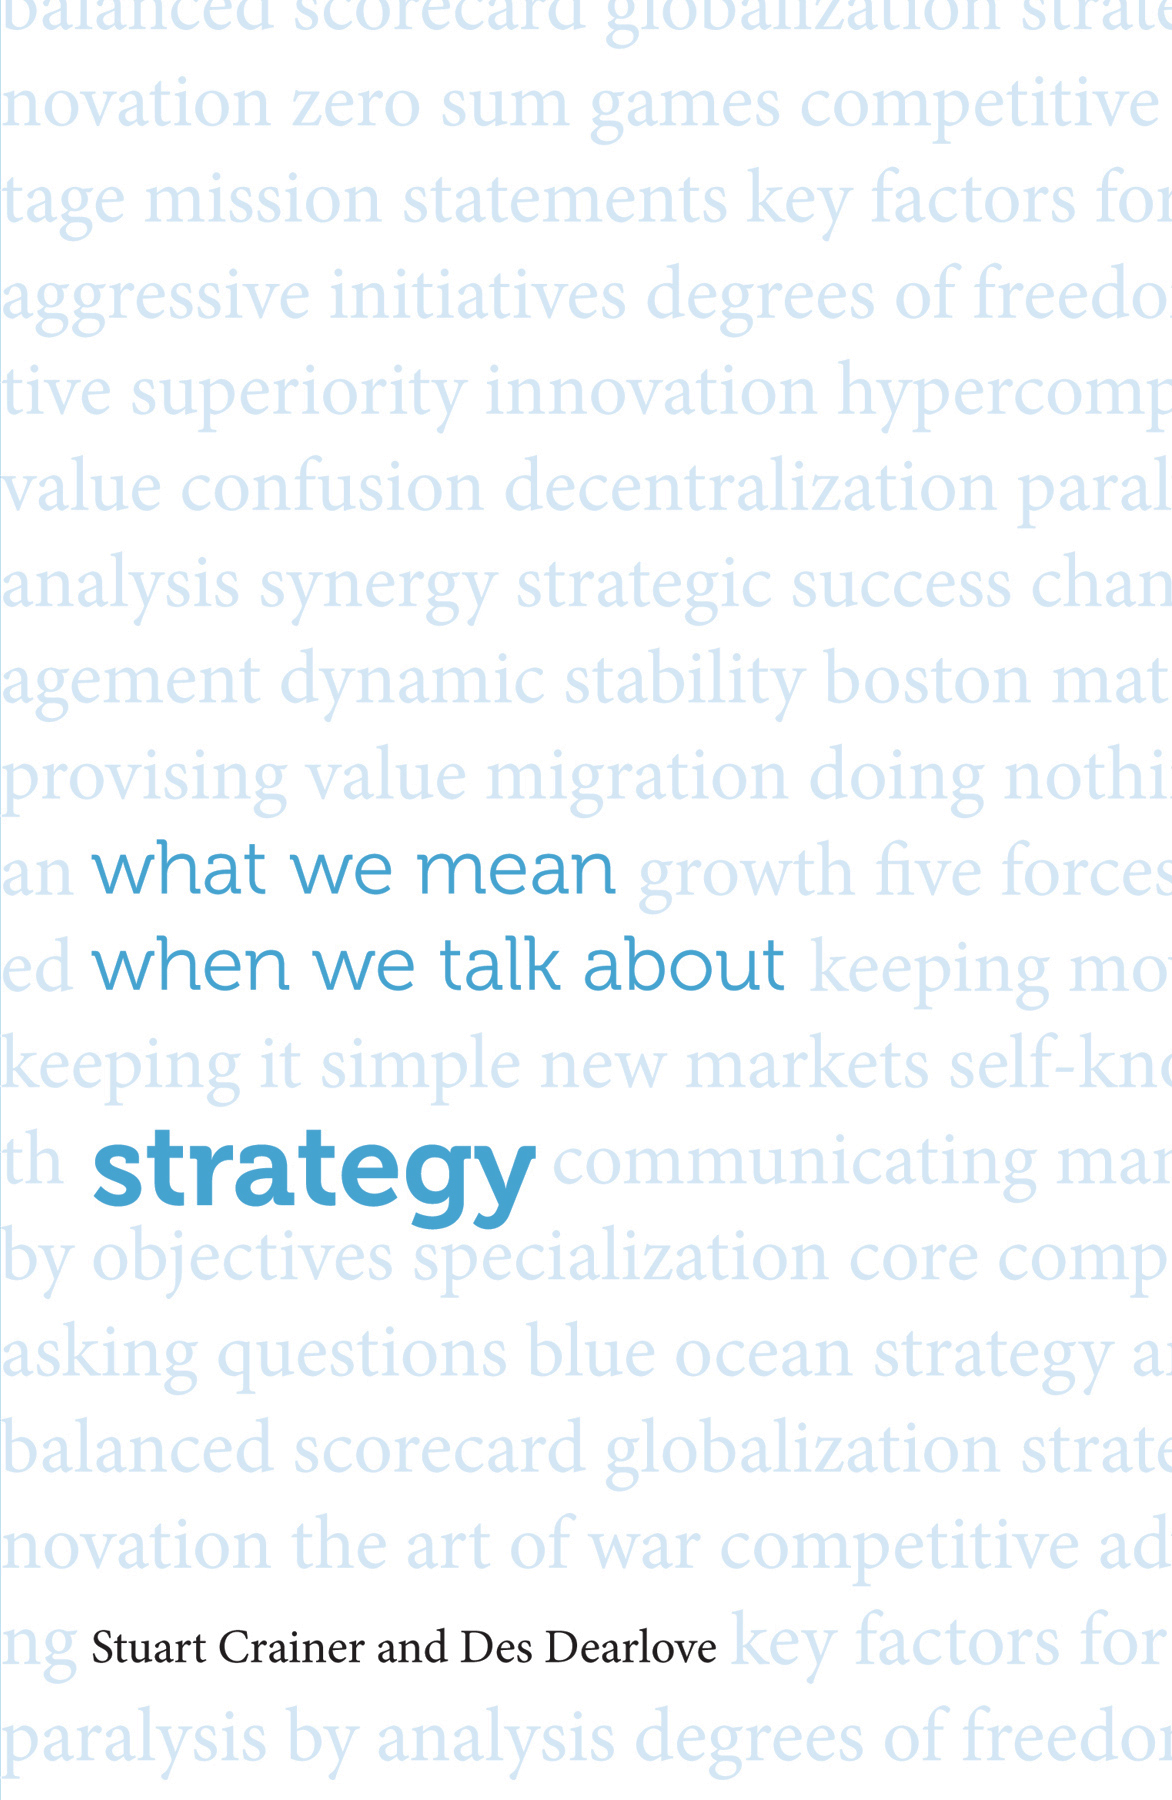 What we mean when we talk about strategy